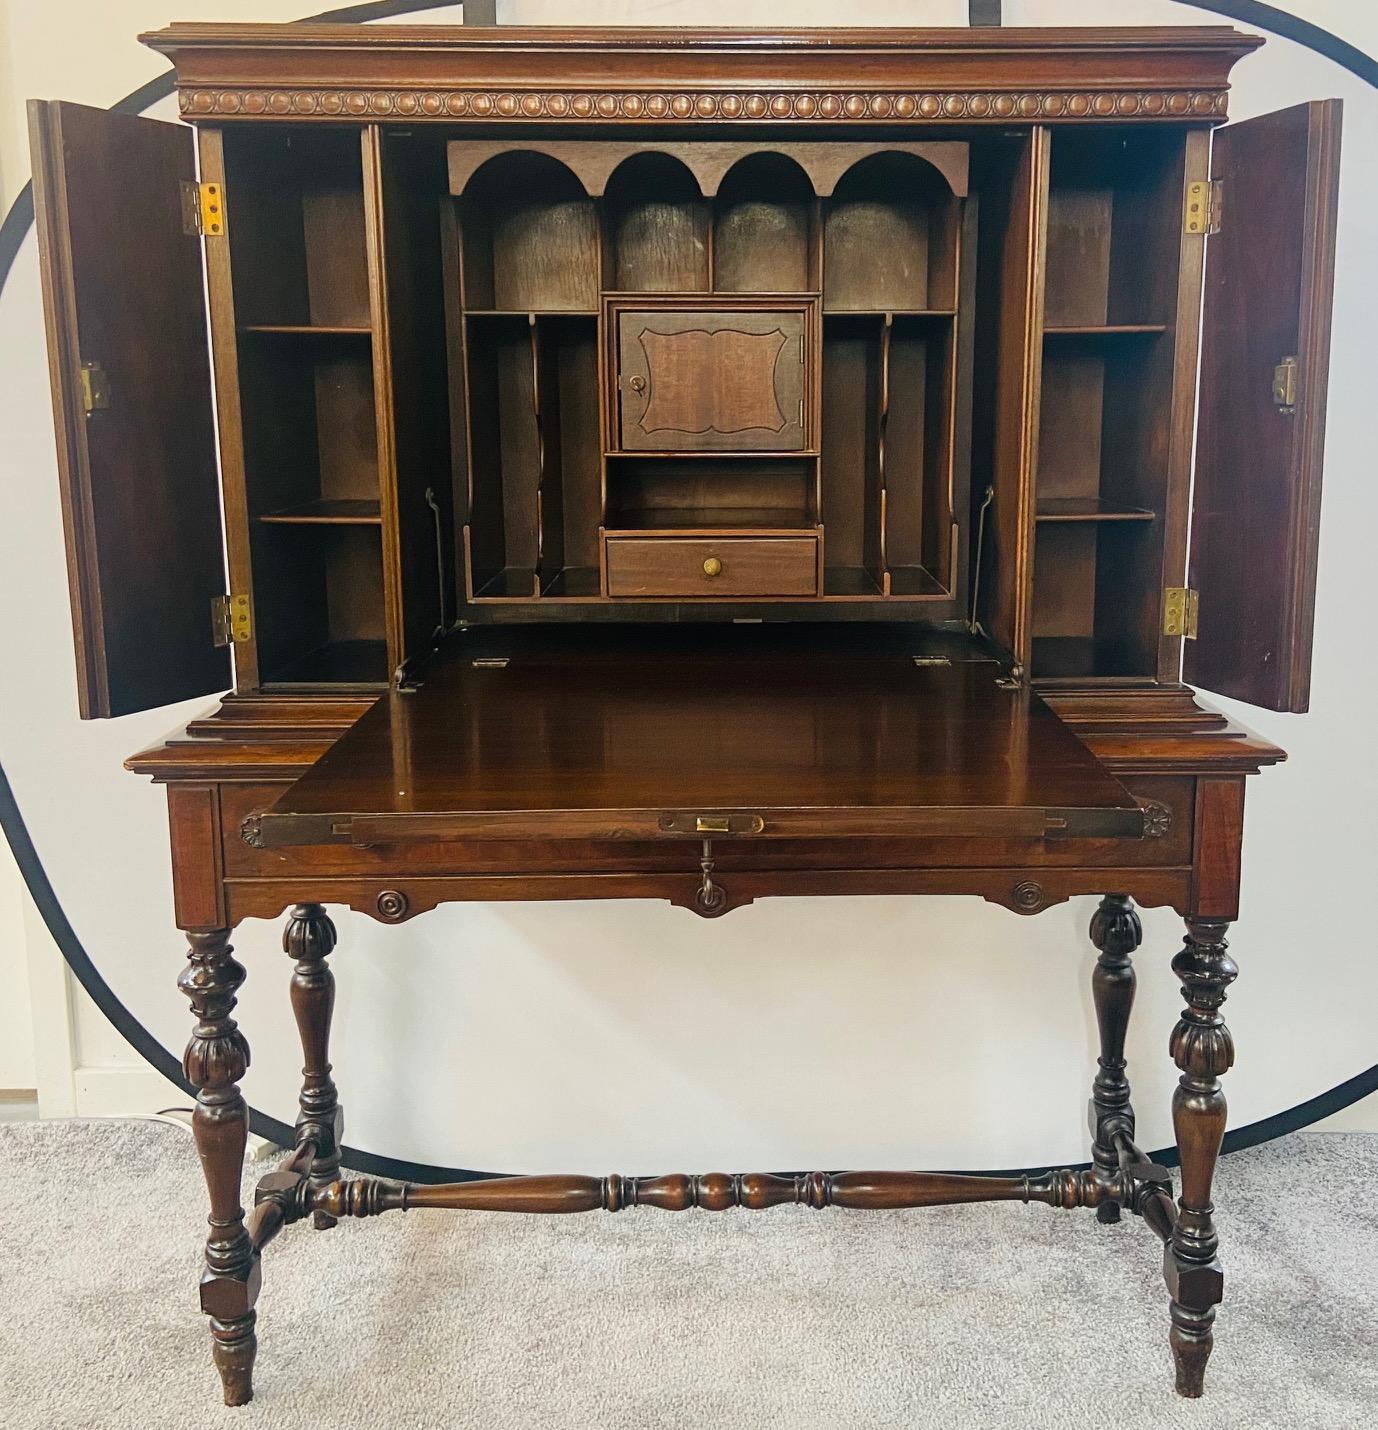 A 1970's Jacobean Spanish colonial style drop-lid slant front desk made of quality flame mahogany with upper double side door cabinets. Featuring a solid mahogany construction with a beautiful flame veneer, the desk offers multiple open compartments